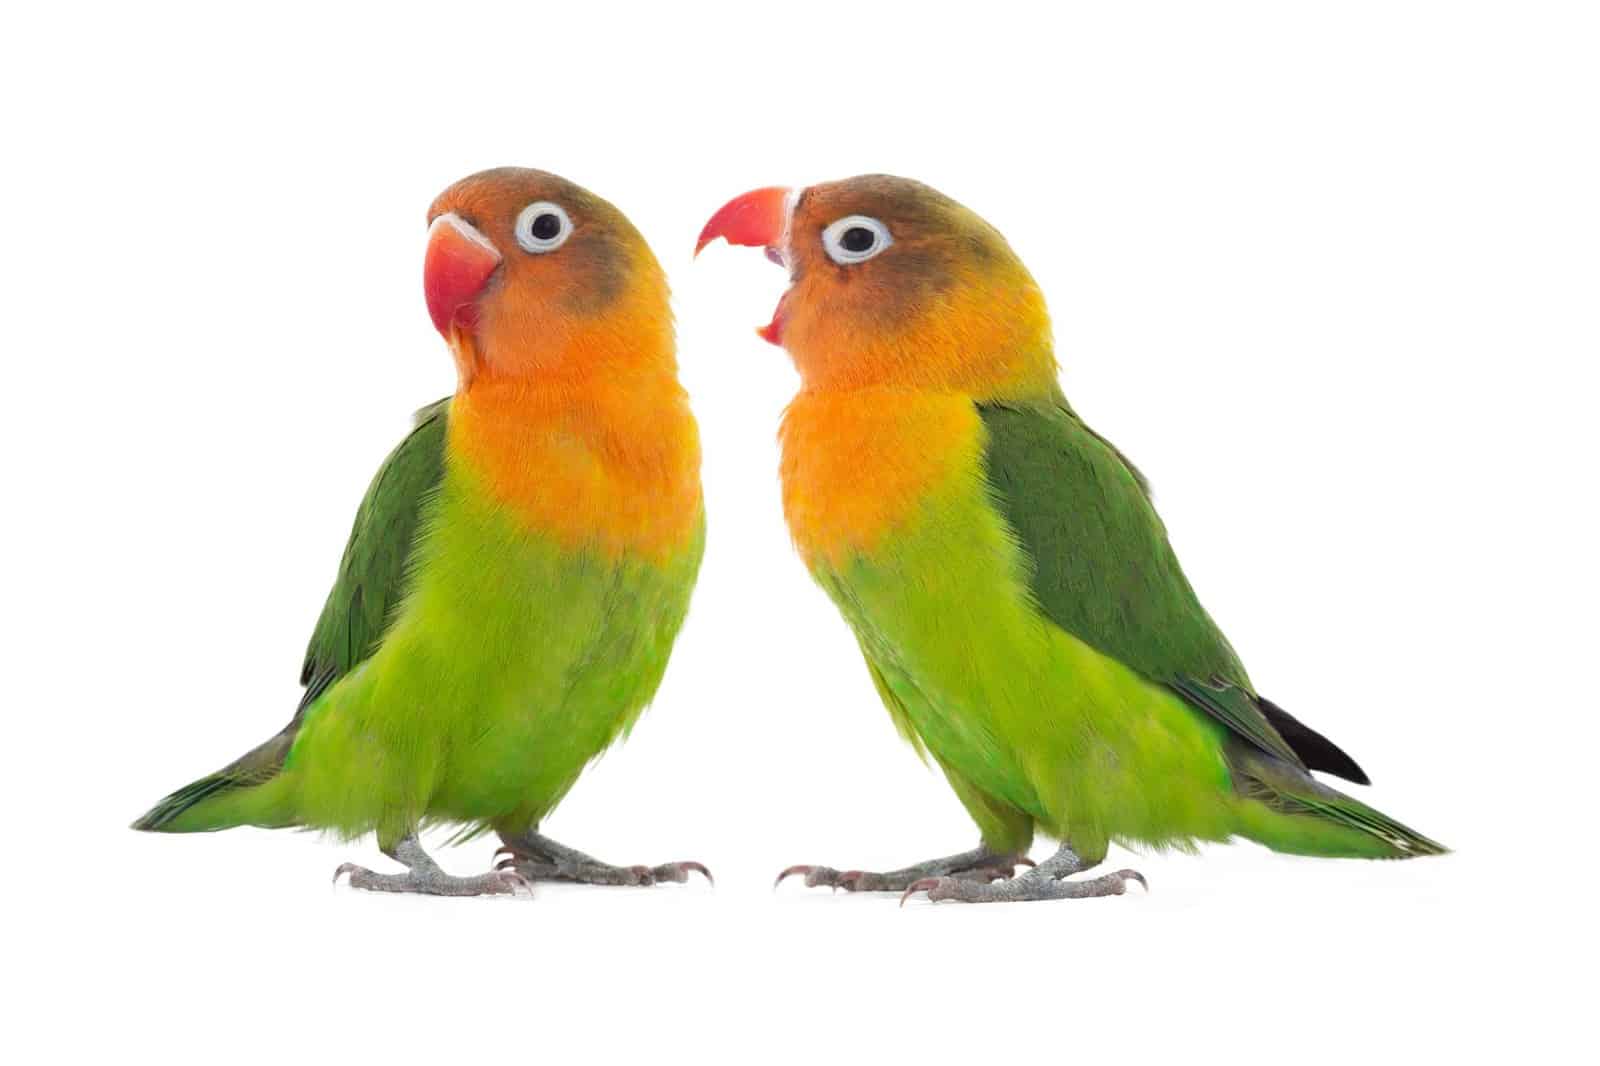 Lovebird Colors Explained (You Won’t Believe This)